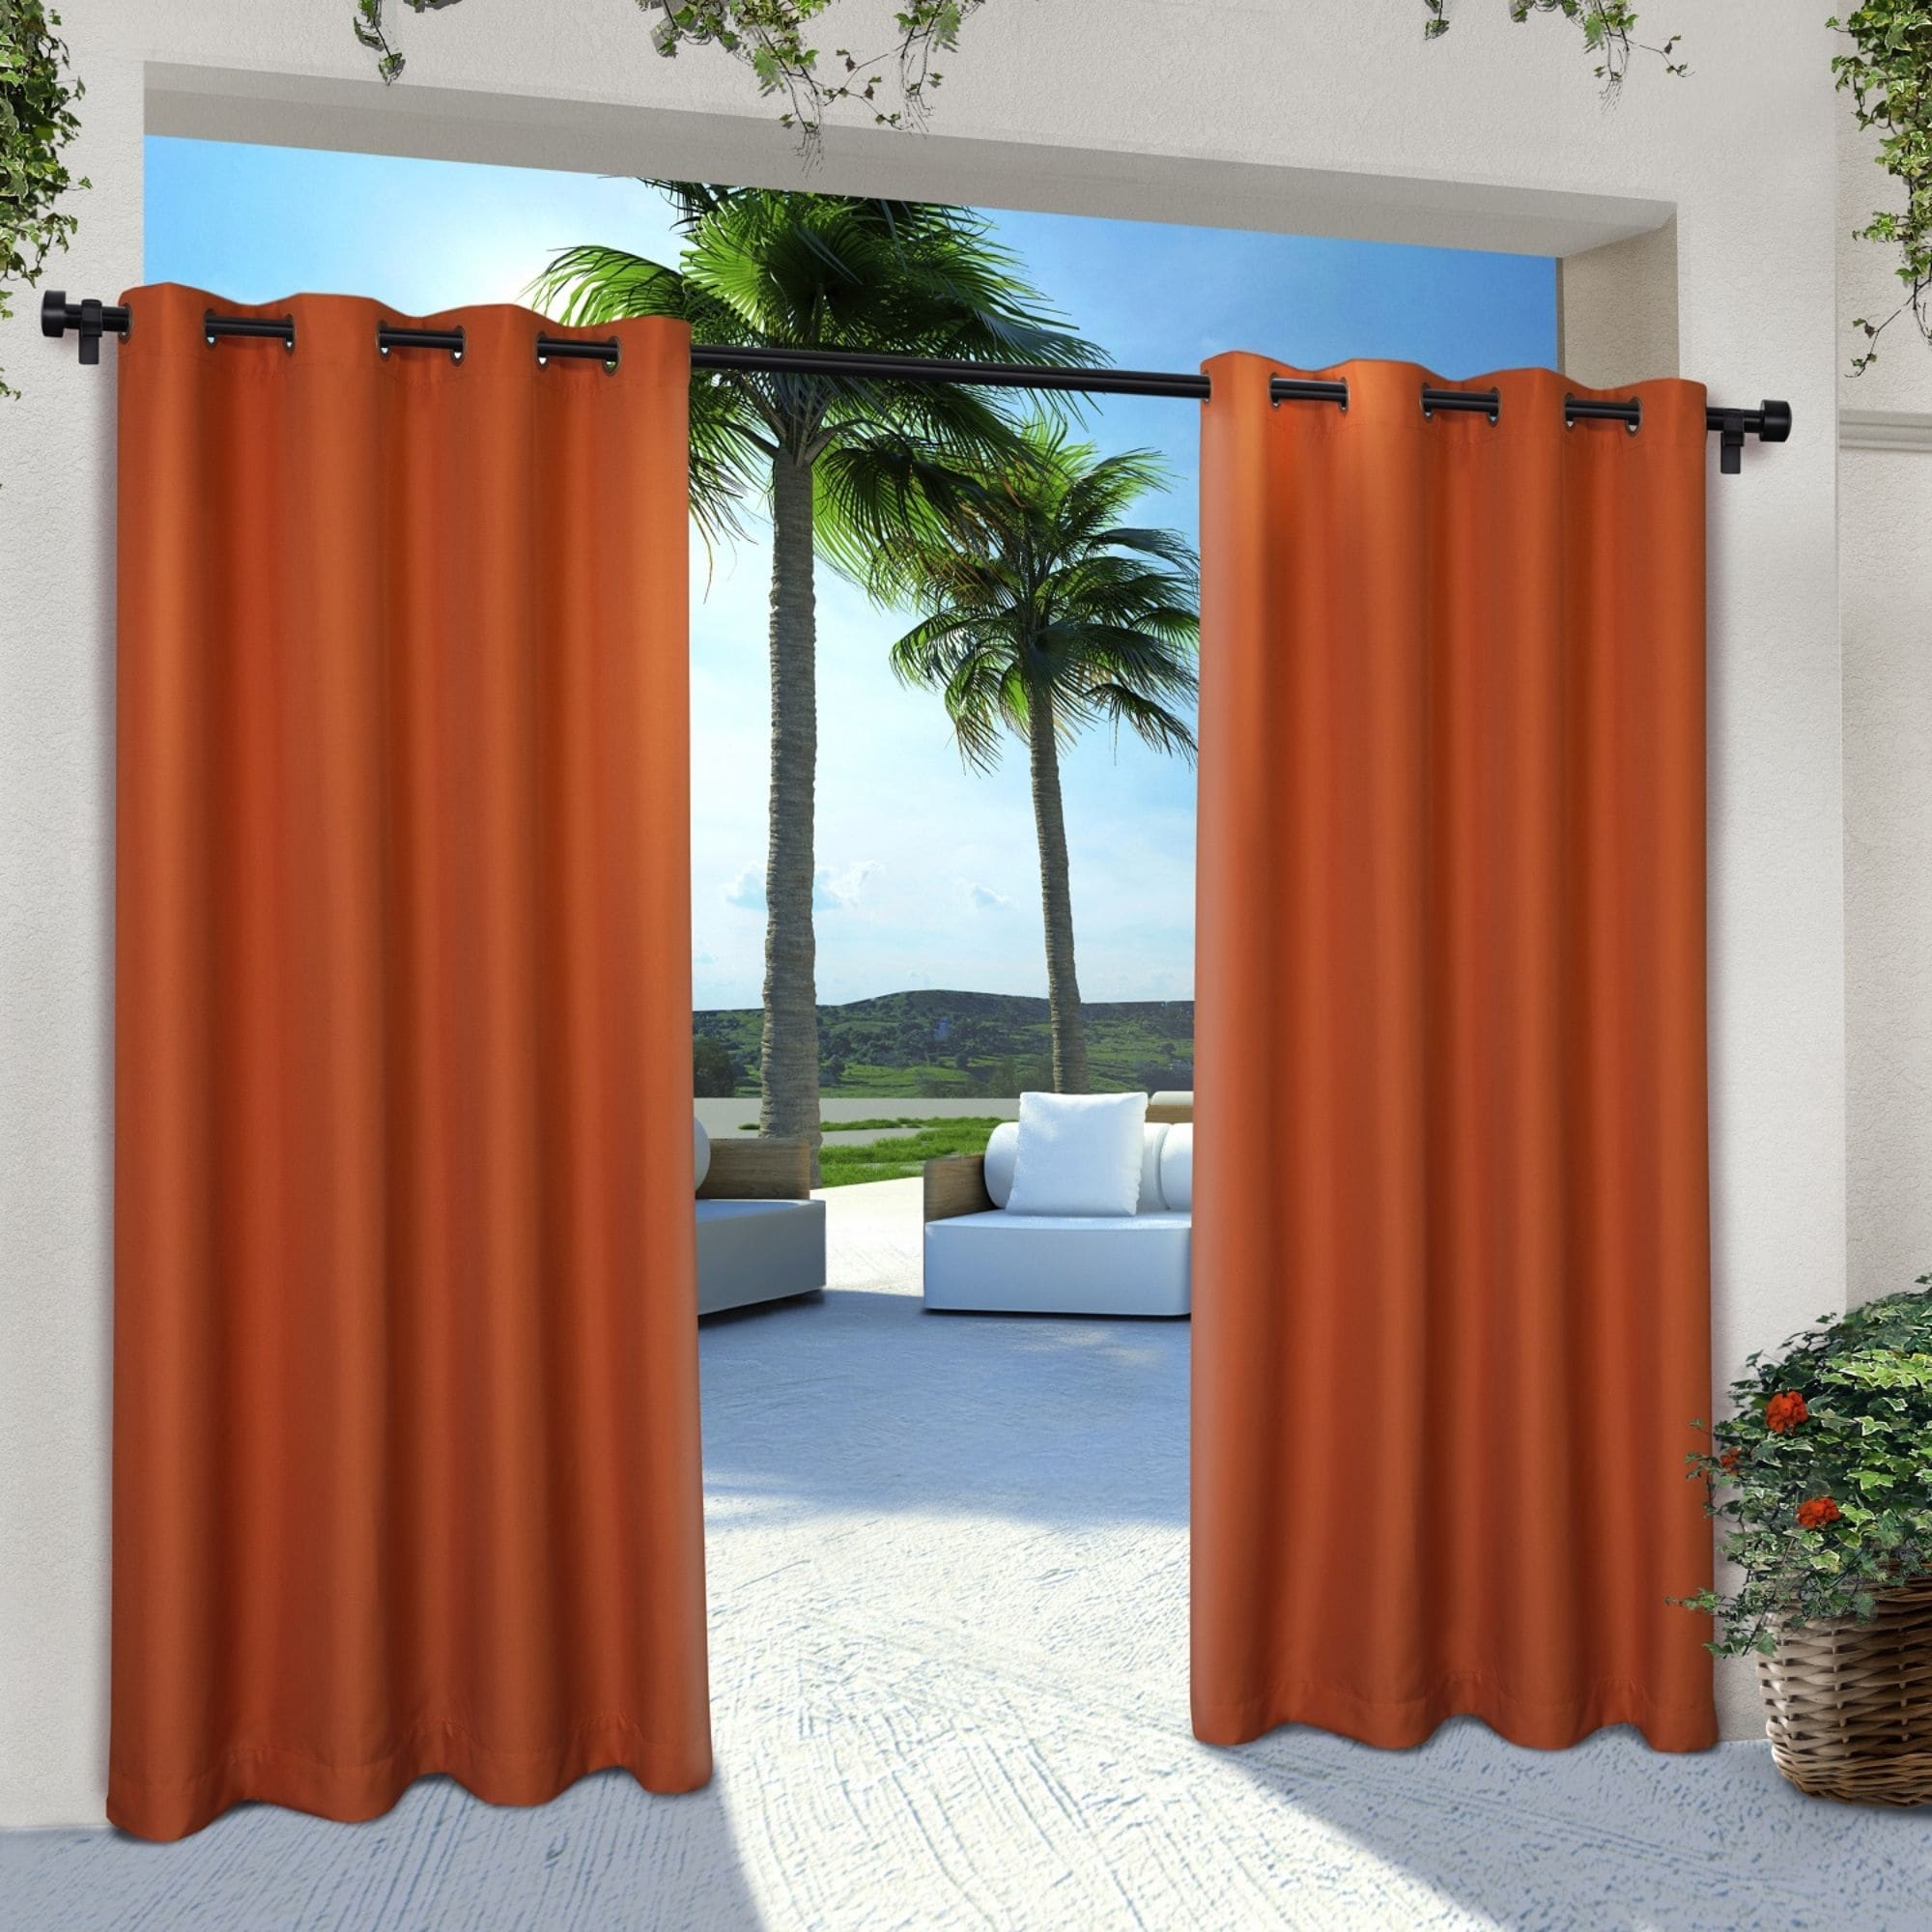 maxmill Waterproof Indoor/Outdoor Curtains for Patio Sun Blocking Living Room Anti-Rust Grommet Blackout Drapes for Porch Cabana White Pergola Thermal Insulated 1 Panel W 52 x L 108 Inch 